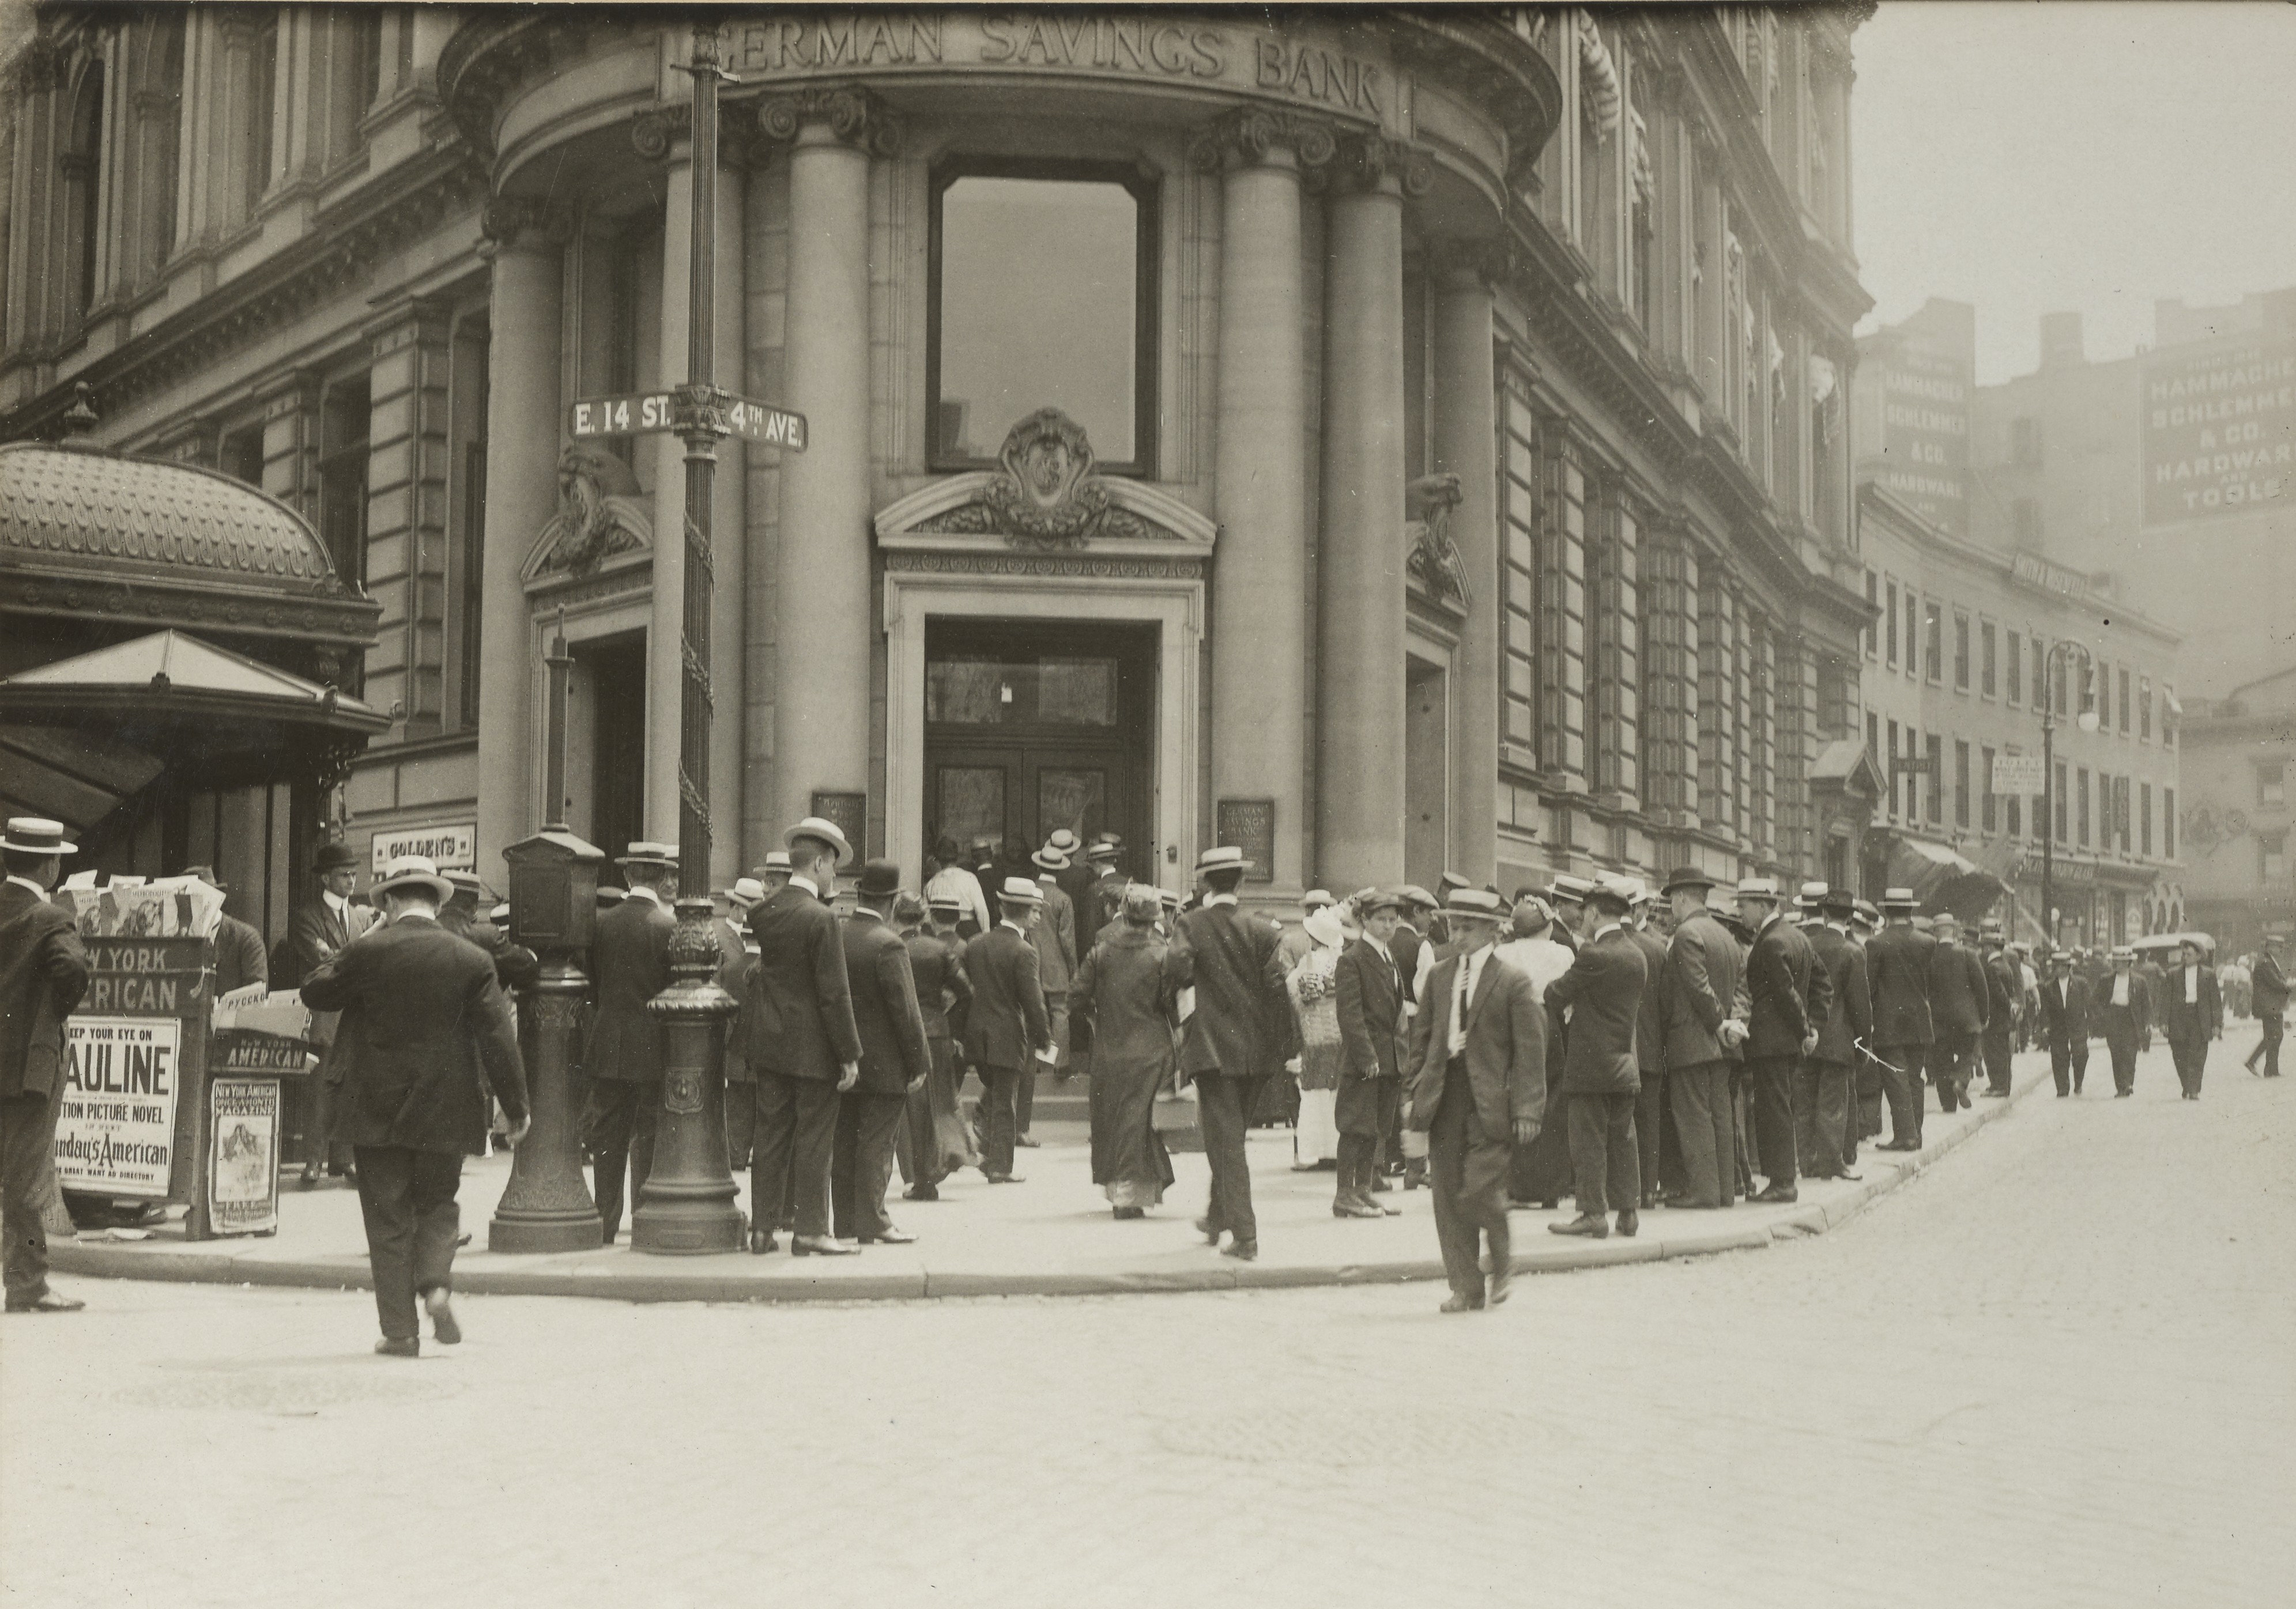 Enemy Activities - Miscellaneous - Depositors making a run on the German Savings Bank, New York, upon the outbreak of the war, August 1914 - NARA - 31480058 (cropped)